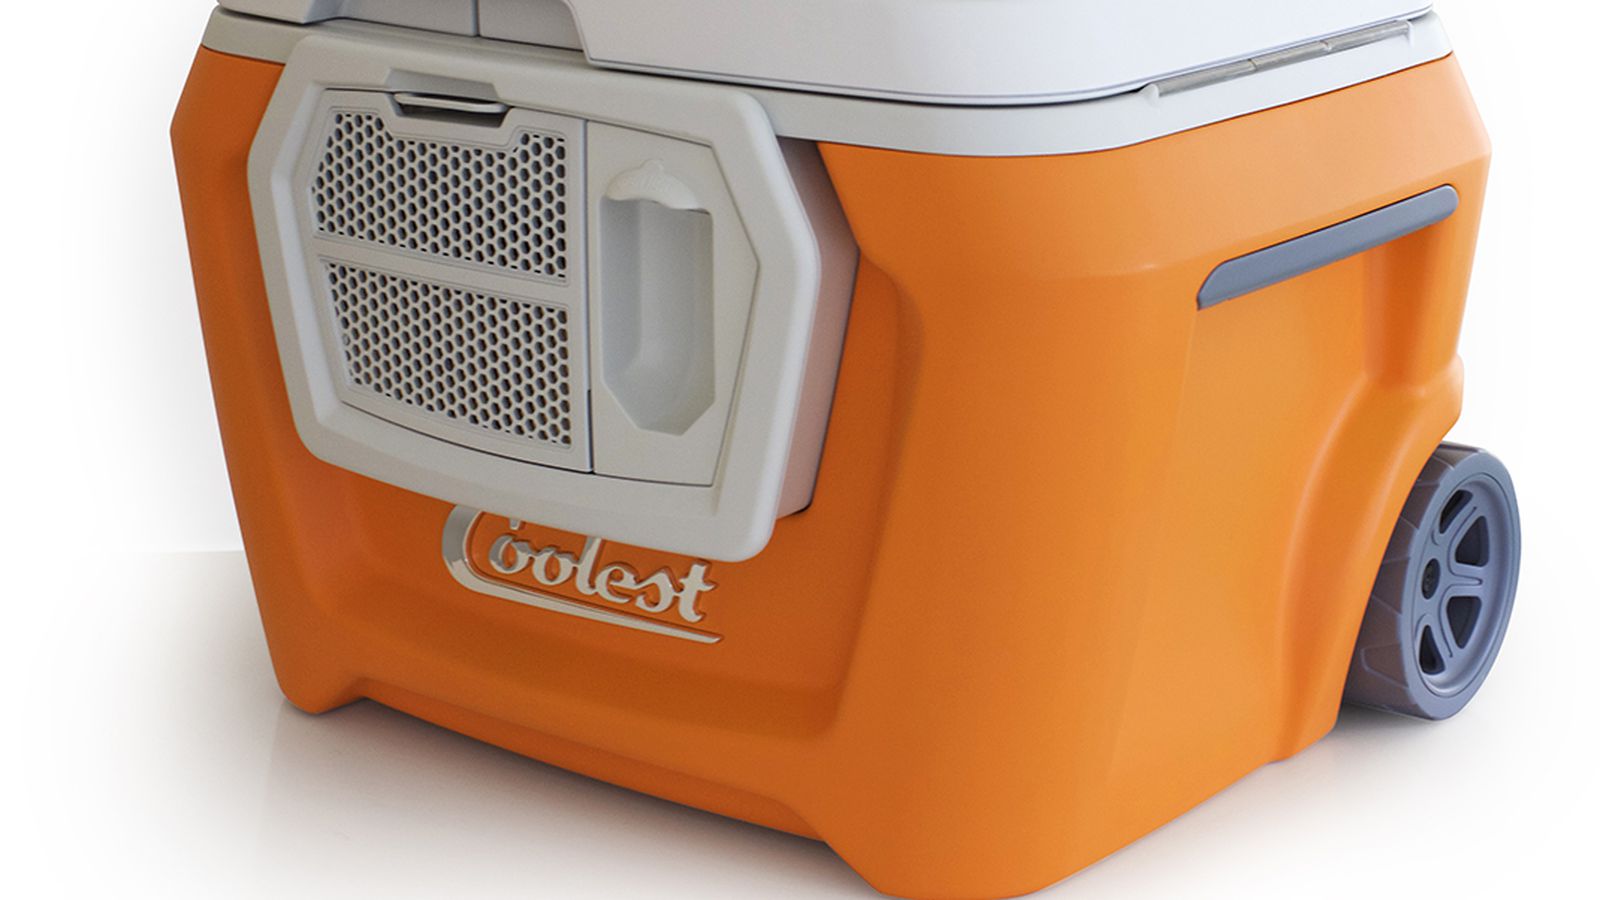 $13 million Kickstarter project for a cooler continues to be a disaster ...